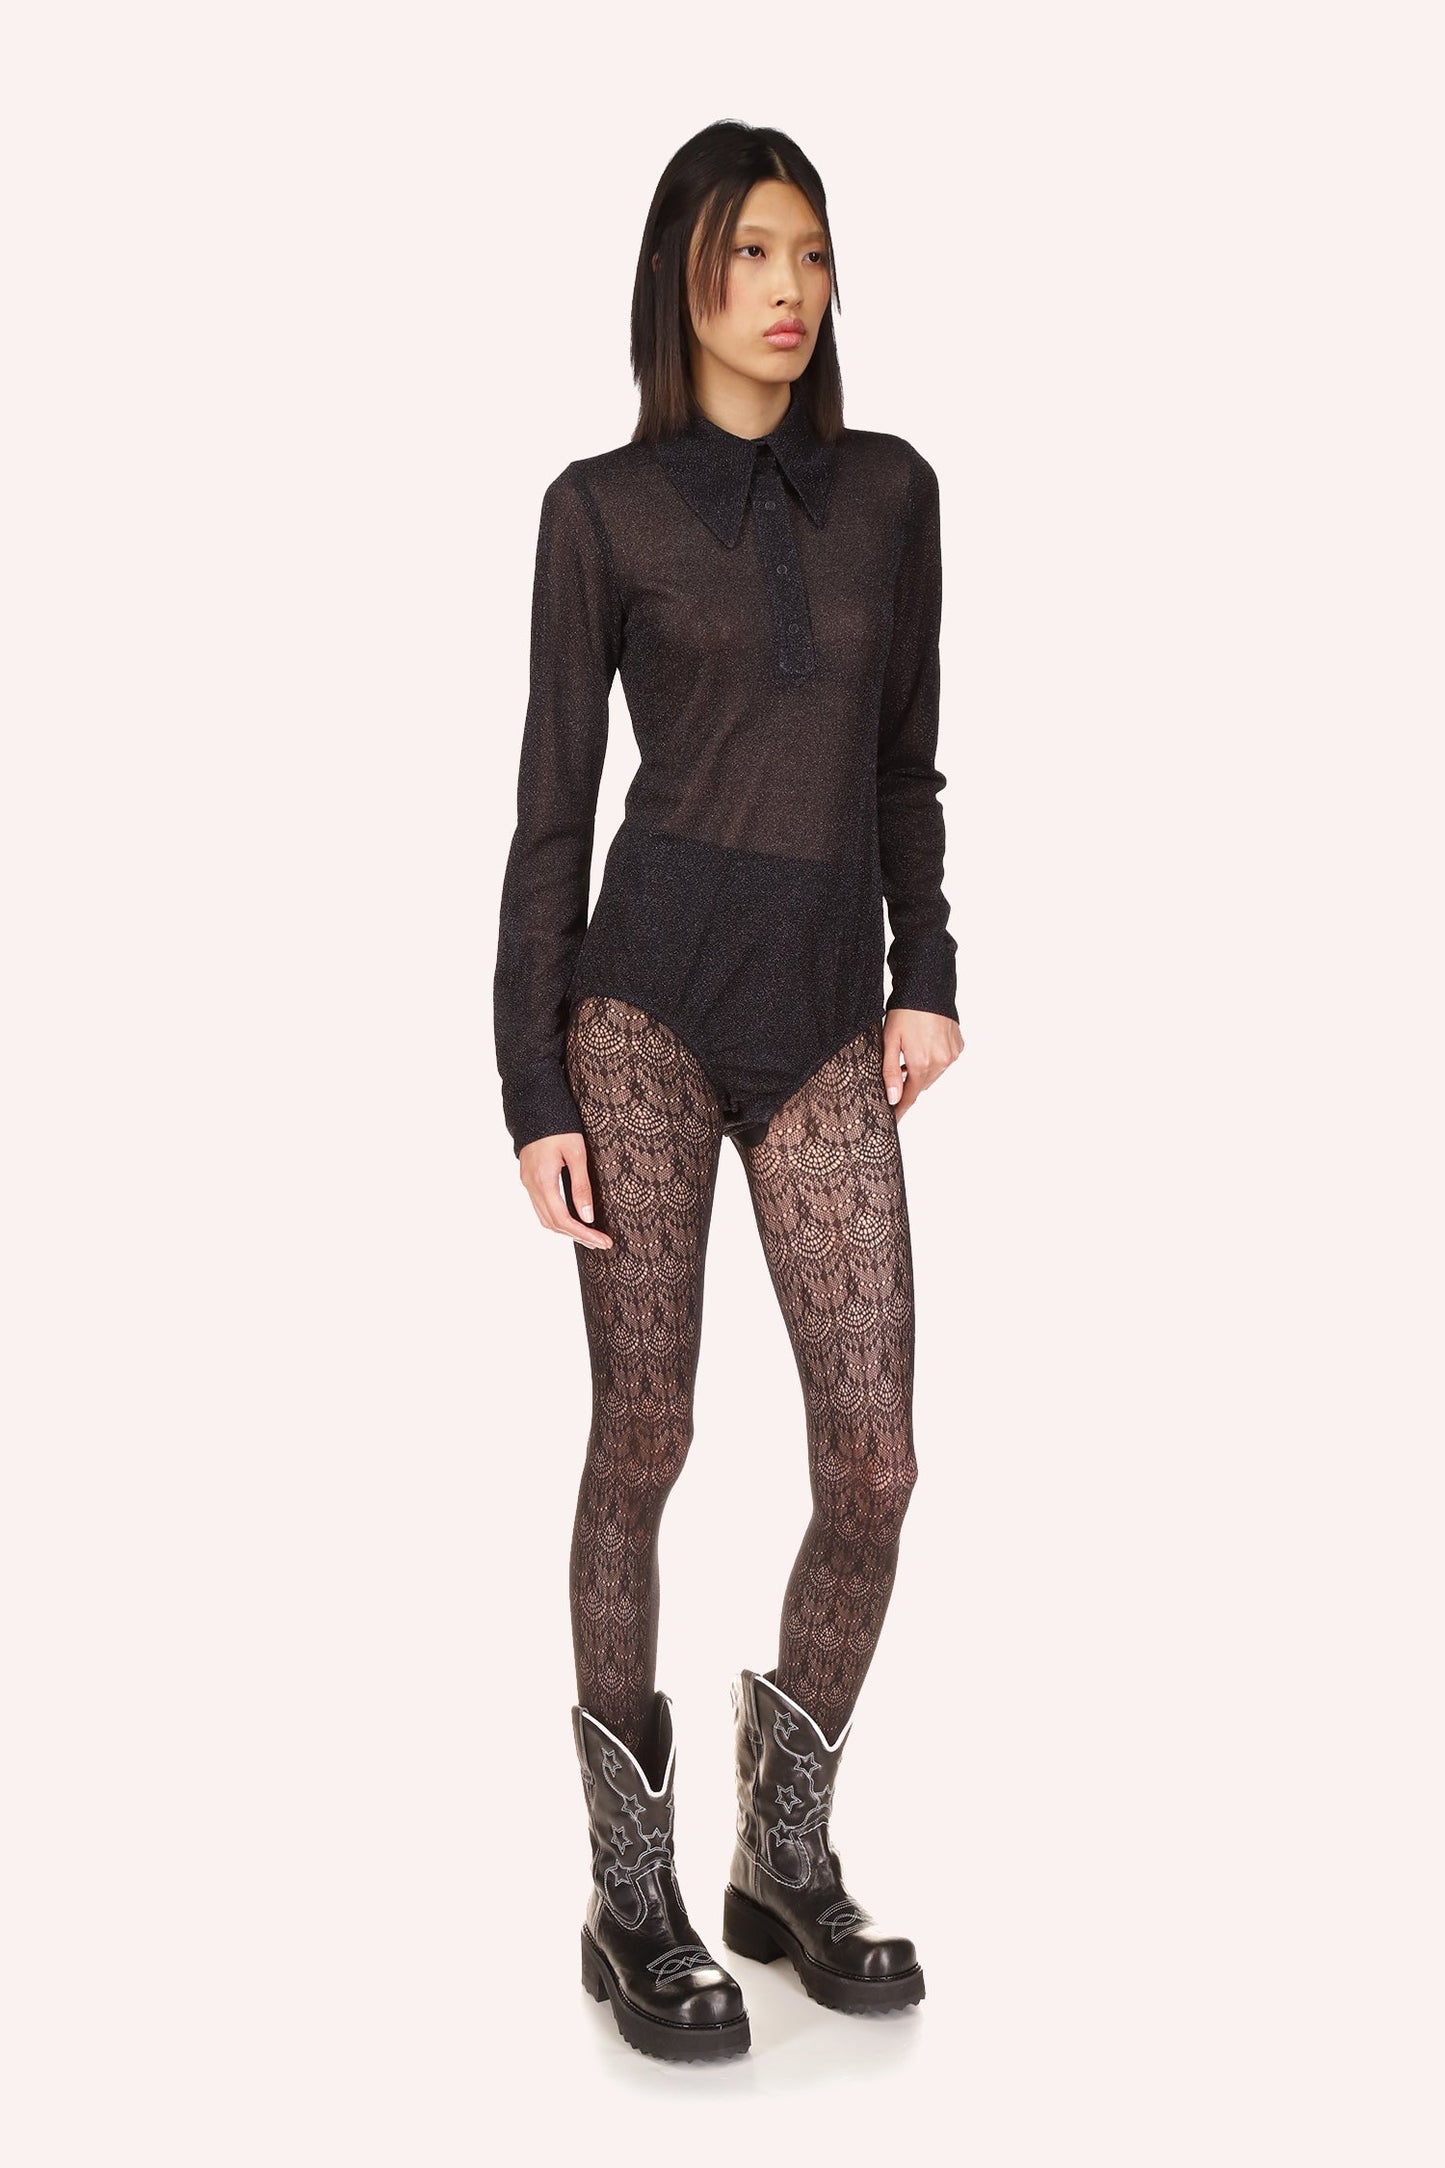 Anna Sui Sparkling Mesh Bodysuit is black stunning piece with a beautiful collar